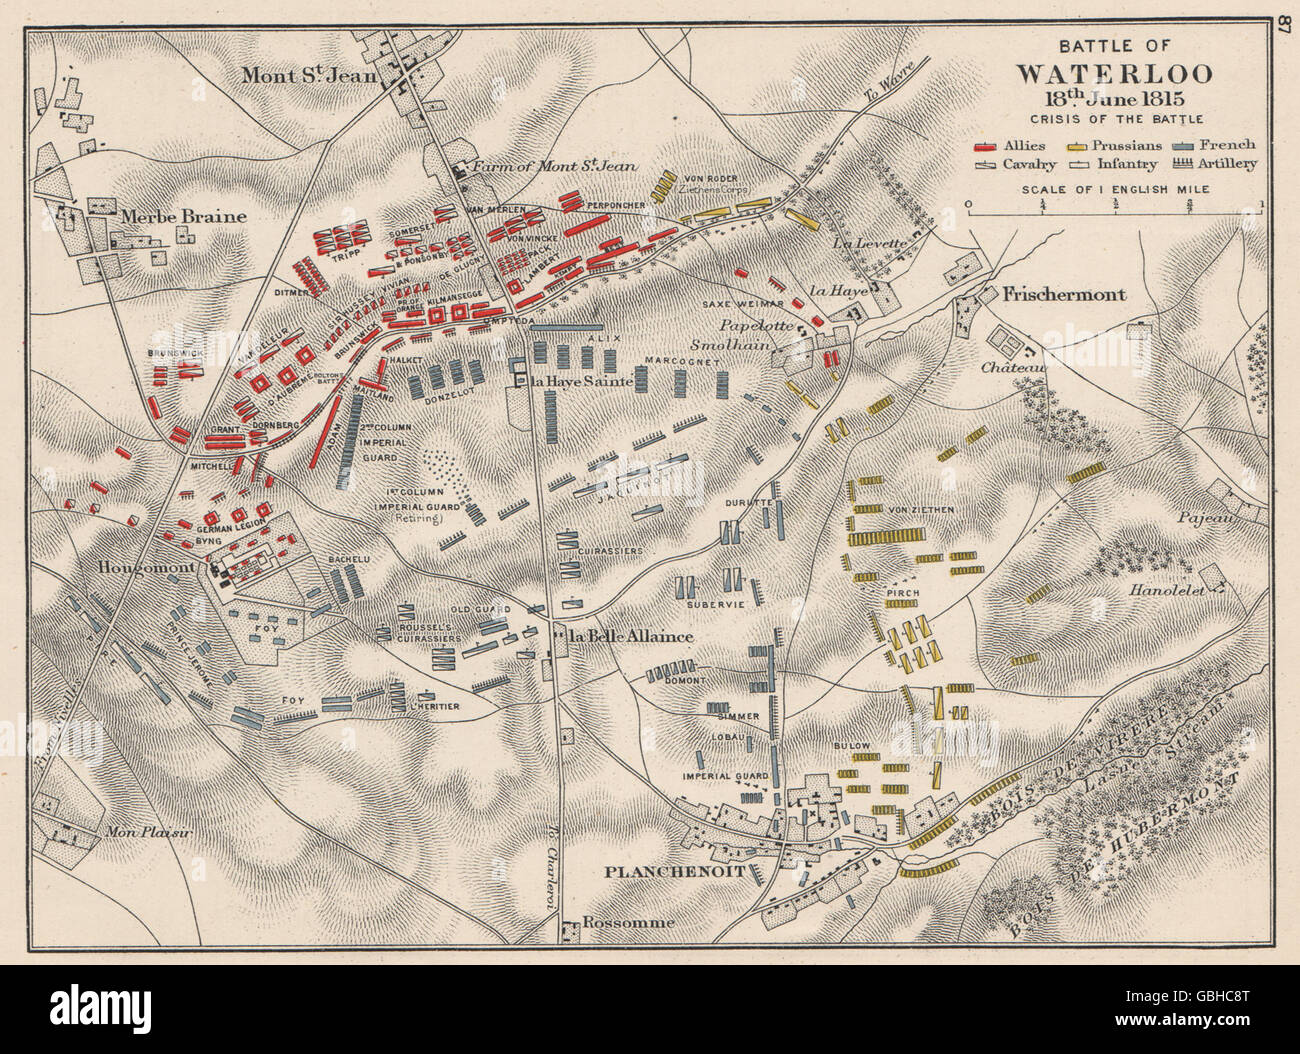 BATTLE OF WATERLOO: 18th June 1815 "crisis of the battle", 1907 antique map Stock Photo